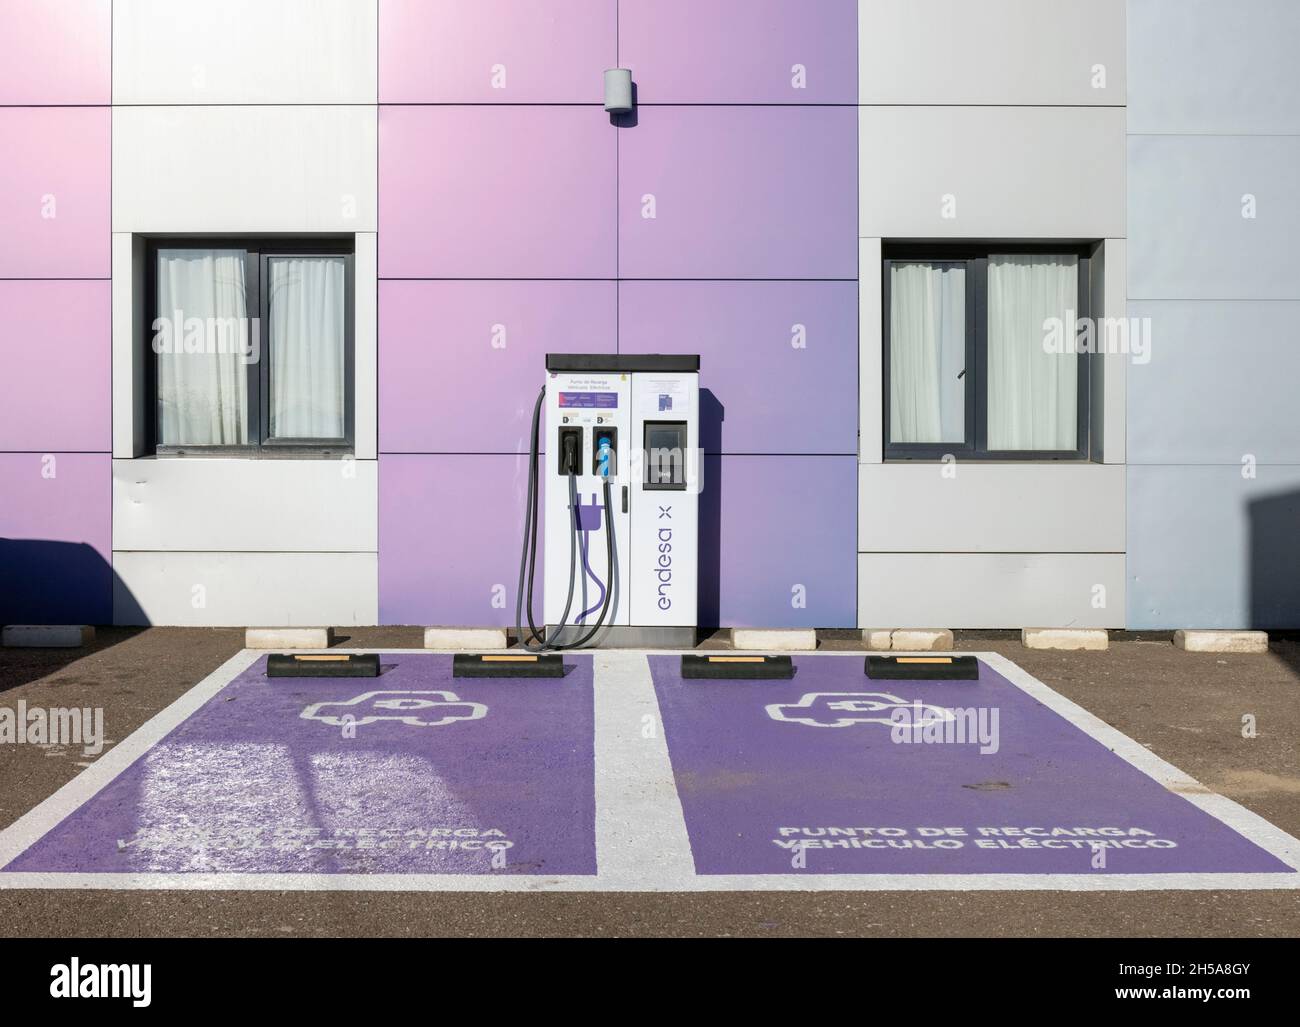 An Endesa electric car charging station near Merida, Badajoz Province, Spain.  Endesa S.A. is the largest electric untility company in Spain. Stock Photo